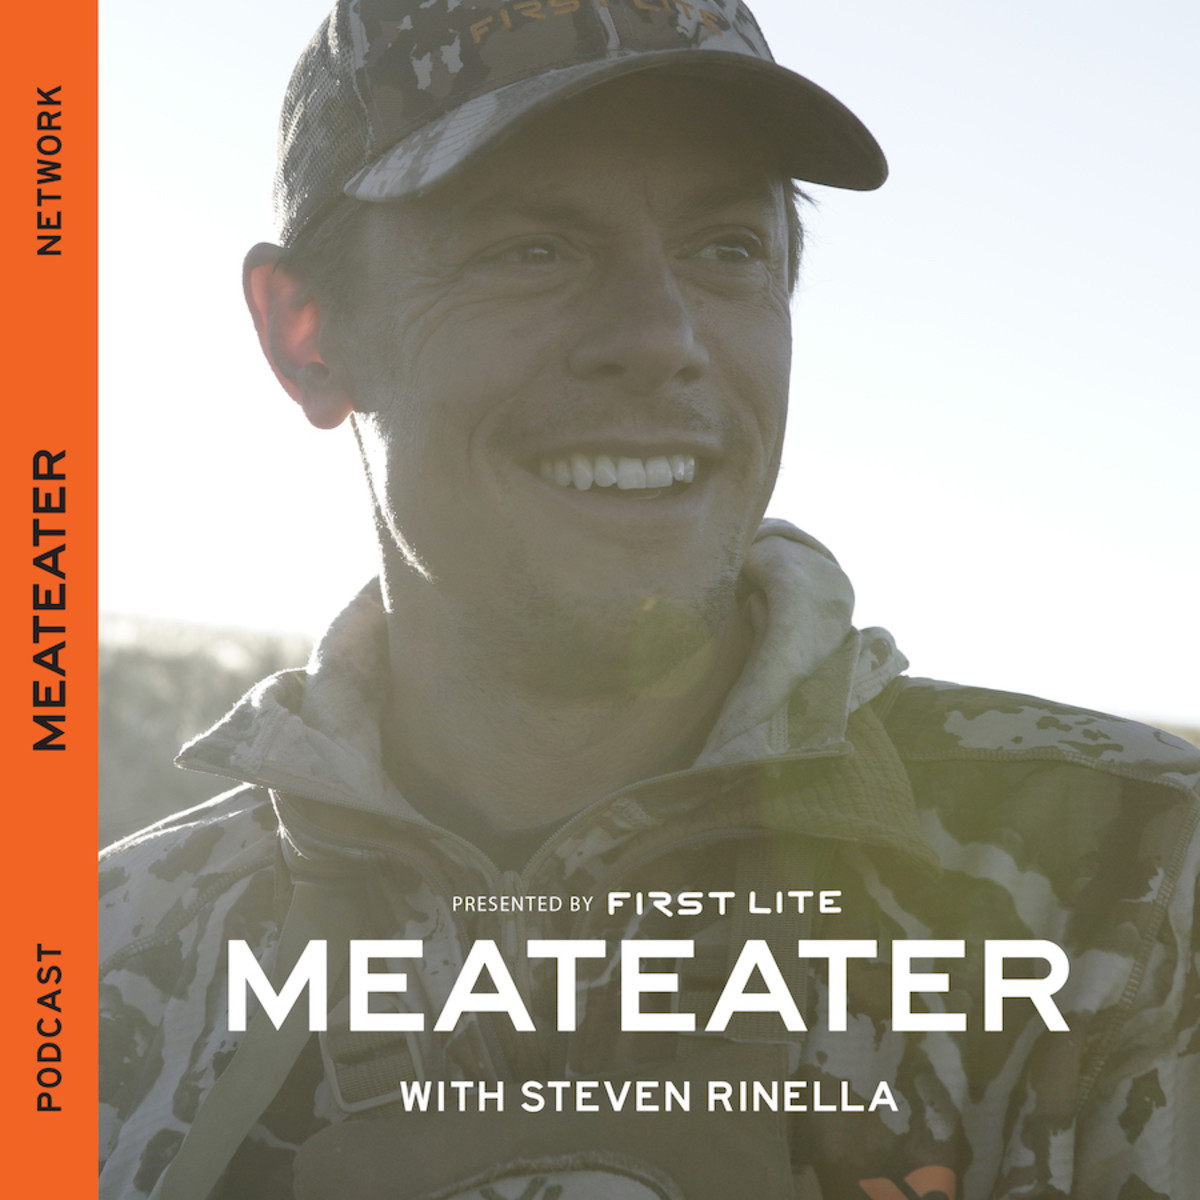 Ep. 50: Steven Rinella answers frequently asked listener questions with Remi Warren along with Janis Putelis, Garret Smith, and Rick Smith from the MeatEater crew.